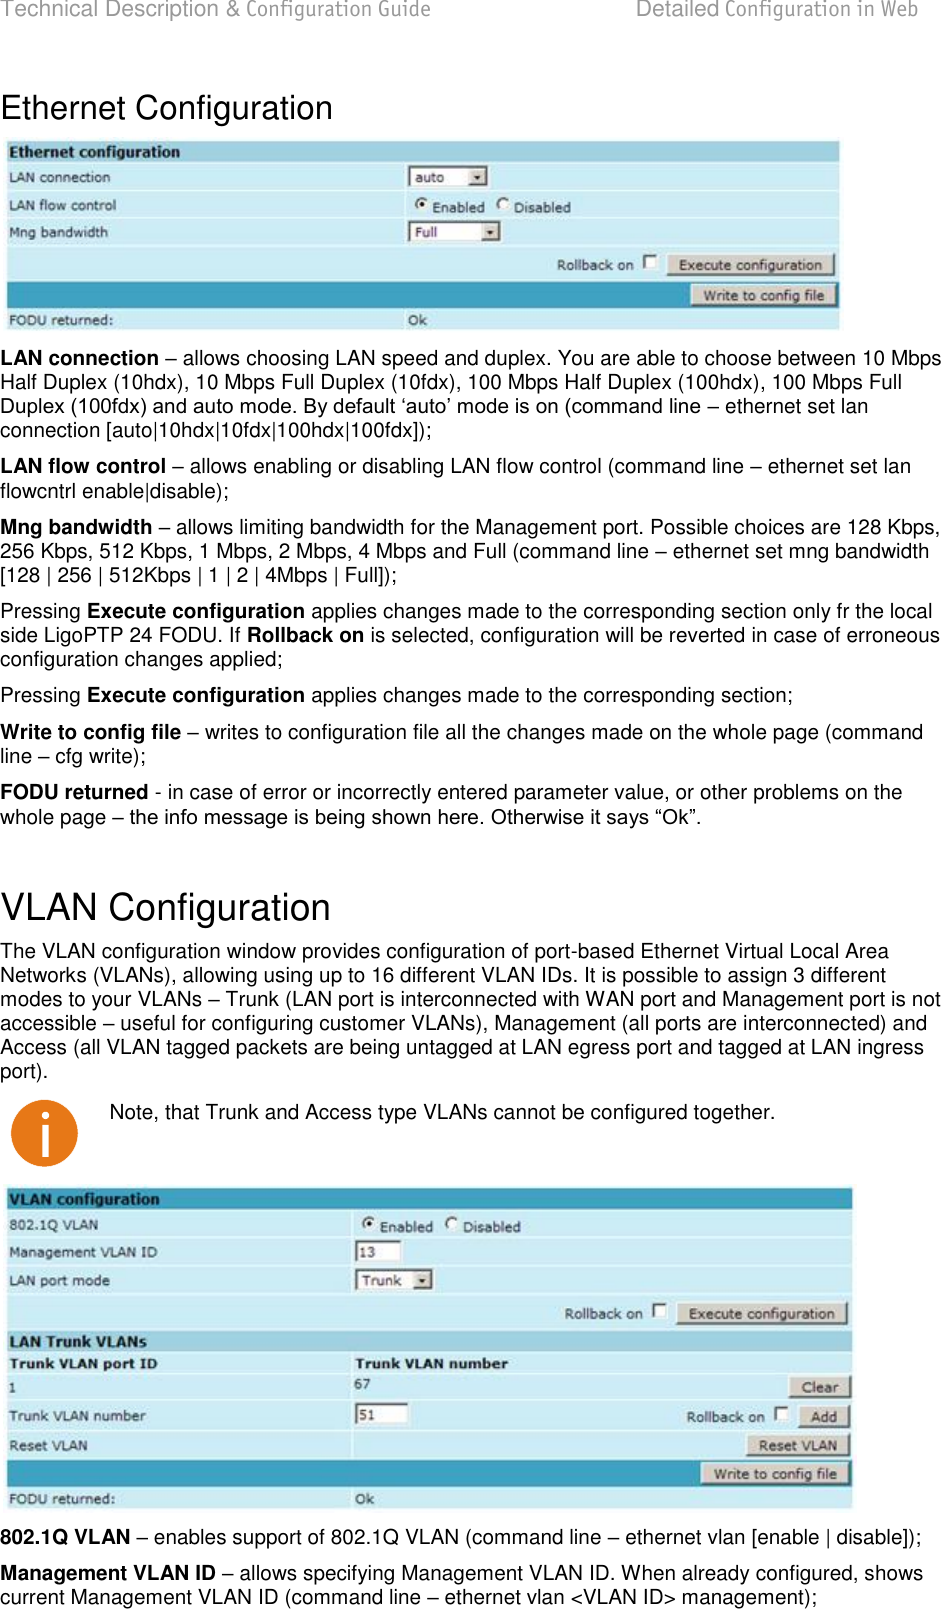 Technical Description &amp; Configuration Guide  Detailed Configuration in Web  LigoWave  Page 48 Ethernet Configuration  LAN connection  allows choosing LAN speed and duplex. You are able to choose between 10 Mbps Half Duplex (10hdx), 10 Mbps Full Duplex (10fdx), 100 Mbps Half Duplex (100hdx), 100 Mbps Full  ethernet set lan connection [auto|10hdx|10fdx|100hdx|100fdx]); LAN flow control  allows enabling or disabling LAN flow control (command line  ethernet set lan flowcntrl enable|disable); Mng bandwidth  allows limiting bandwidth for the Management port. Possible choices are 128 Kbps, 256 Kbps, 512 Kbps, 1 Mbps, 2 Mbps, 4 Mbps and Full (command line  ethernet set mng bandwidth [128 | 256 | 512Kbps | 1 | 2 | 4Mbps | Full]); Pressing Execute configuration applies changes made to the corresponding section only fr the local side LigoPTP 24 FODU. If Rollback on is selected, configuration will be reverted in case of erroneous configuration changes applied; Pressing Execute configuration applies changes made to the corresponding section; Write to config file  writes to configuration file all the changes made on the whole page (command line  cfg write); FODU returned - in case of error or incorrectly entered parameter value, or other problems on the whole page    VLAN Configuration The VLAN configuration window provides configuration of port-based Ethernet Virtual Local Area Networks (VLANs), allowing using up to 16 different VLAN IDs. It is possible to assign 3 different modes to your VLANs  Trunk (LAN port is interconnected with WAN port and Management port is not accessible  useful for configuring customer VLANs), Management (all ports are interconnected) and Access (all VLAN tagged packets are being untagged at LAN egress port and tagged at LAN ingress port).  Note, that Trunk and Access type VLANs cannot be configured together.  802.1Q VLAN  enables support of 802.1Q VLAN (command line  ethernet vlan [enable | disable]); Management VLAN ID  allows specifying Management VLAN ID. When already configured, shows current Management VLAN ID (command line  ethernet vlan &lt;VLAN ID&gt; management); 